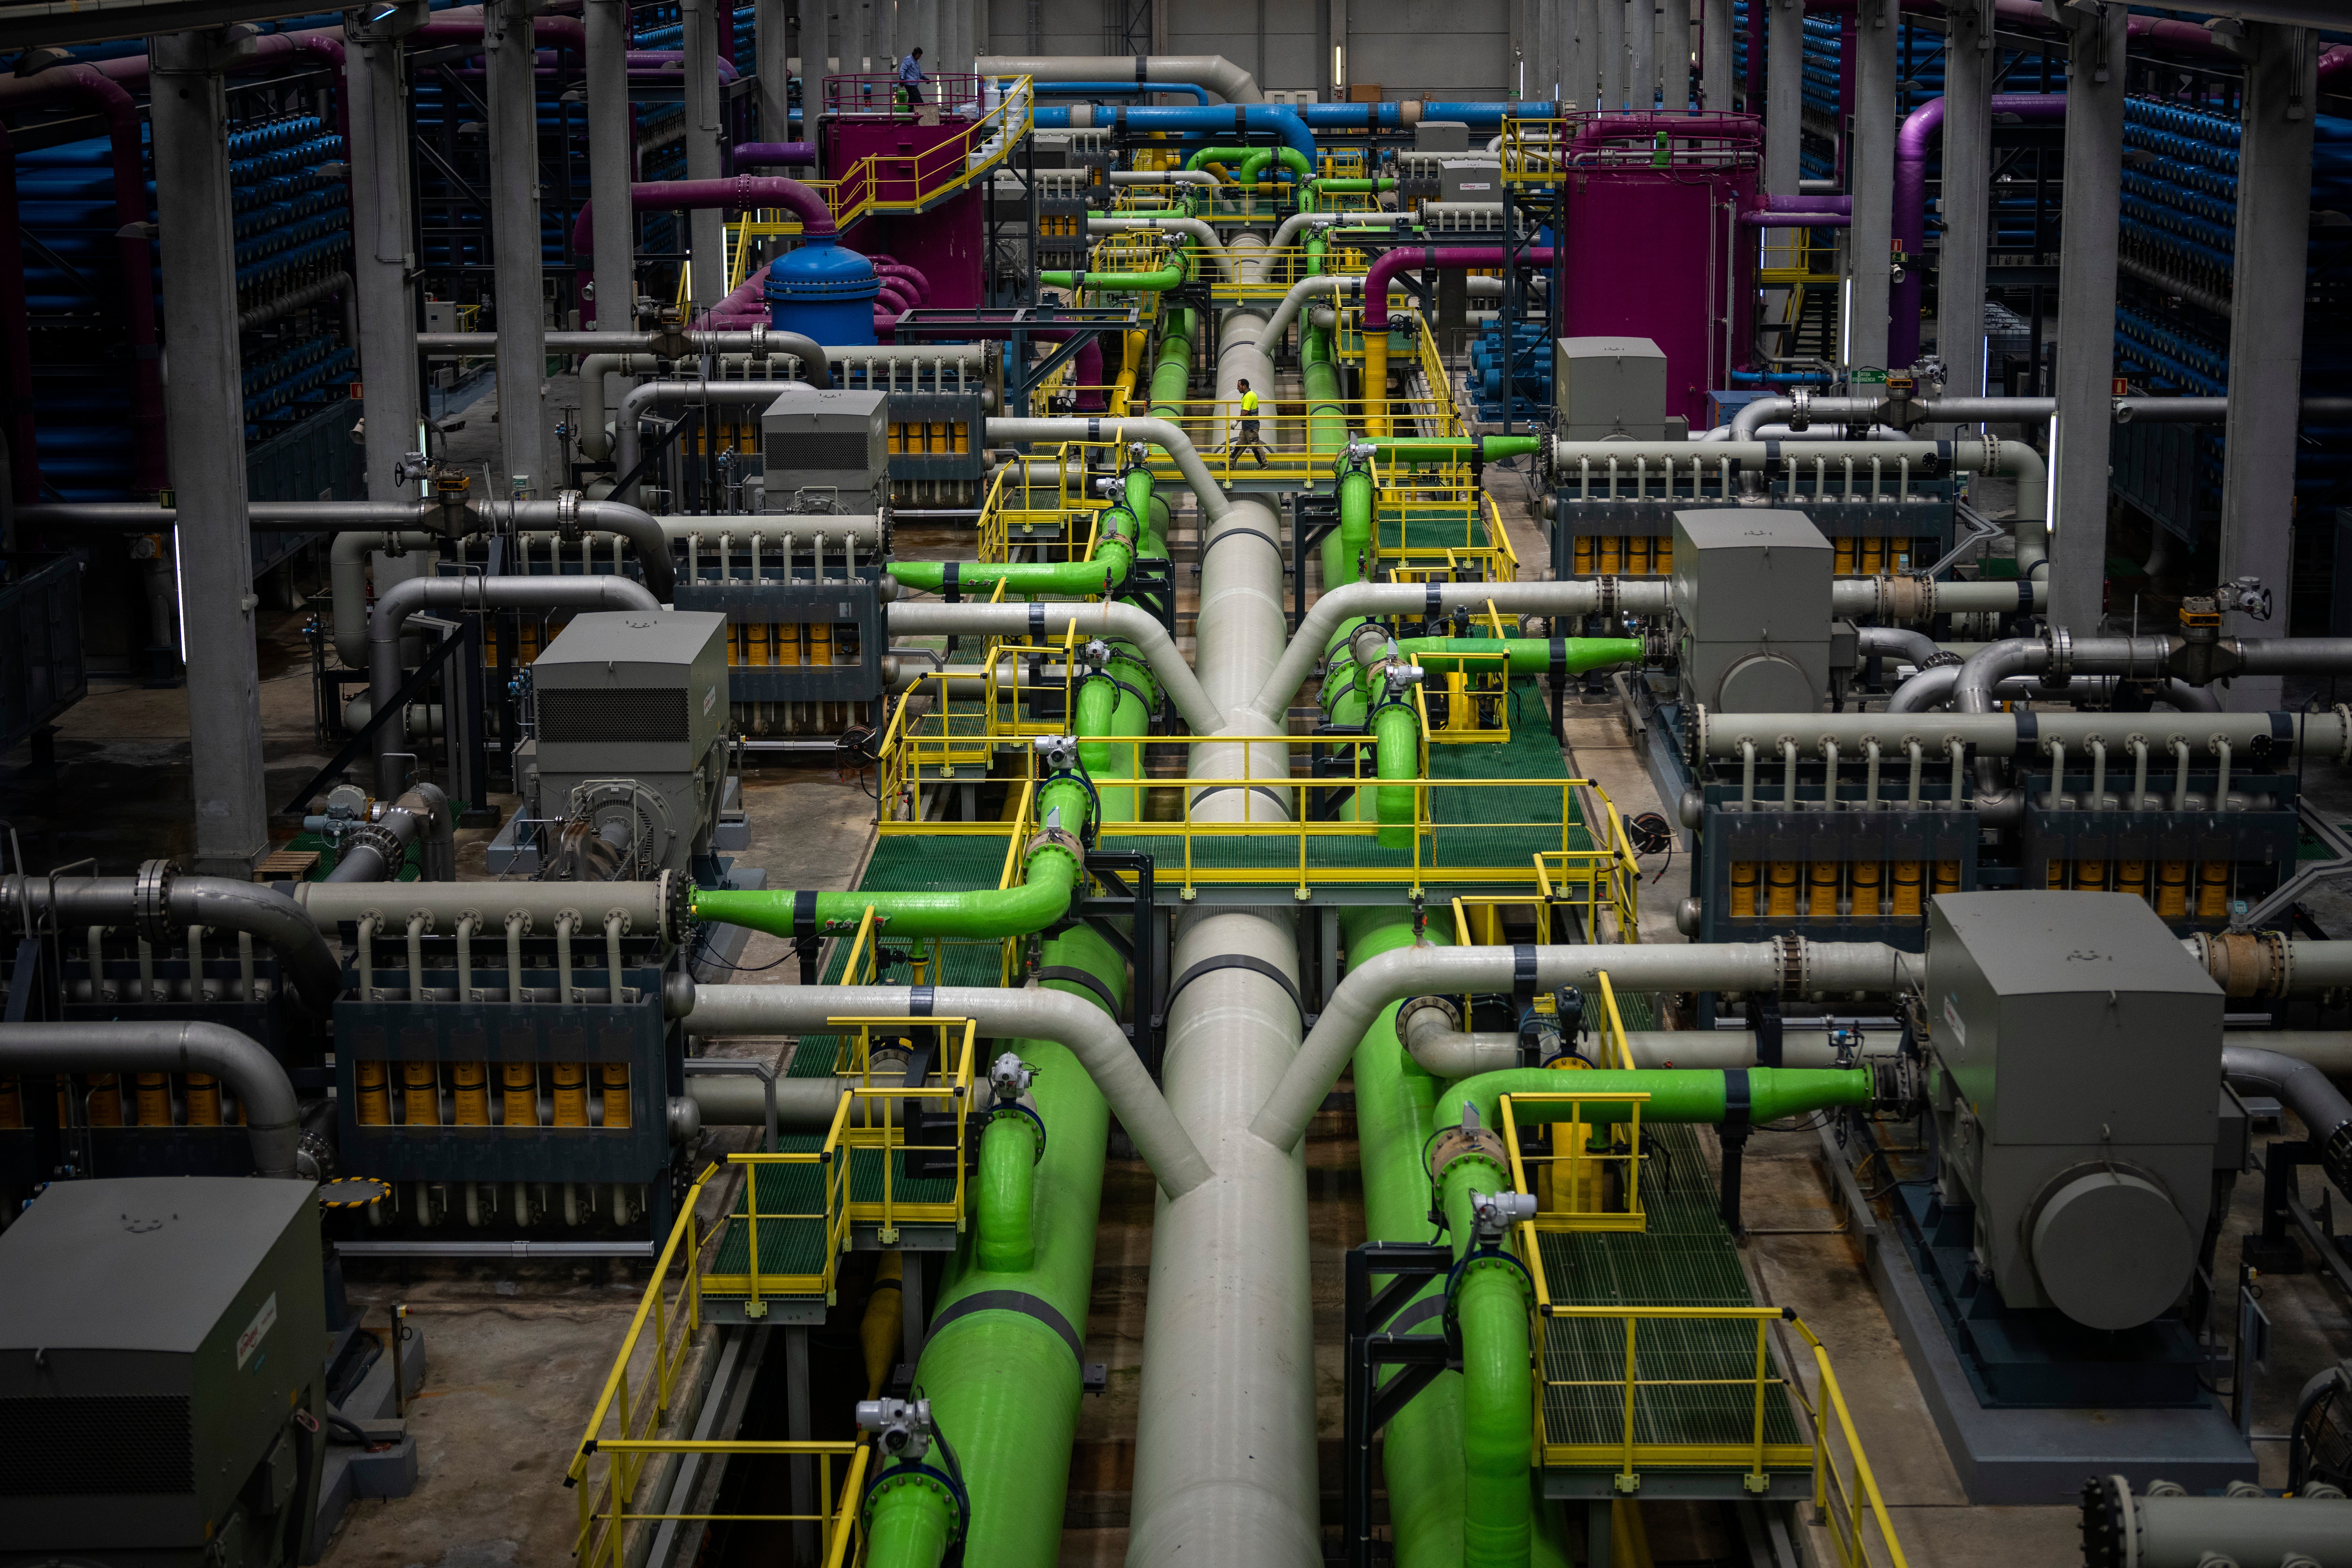 A pipeline that transports seawater to filters at Europe’s largest desalination plant for drinking water in Spain